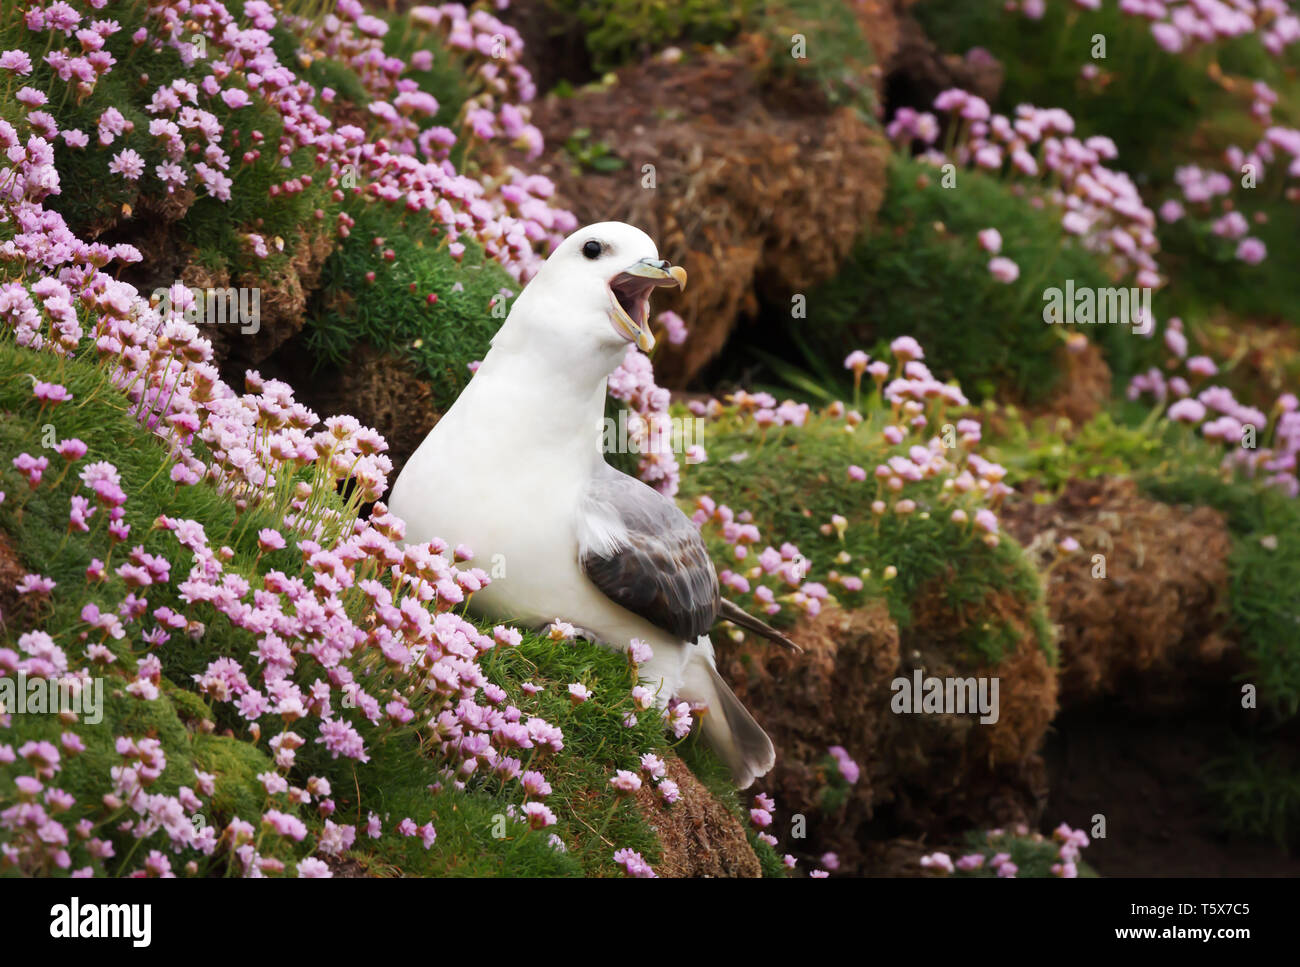 Close up of a calling Northern Fulmar (Fulmarus glacialis) in a field of thrift flowers, Shetland Islands, UK. Stock Photo